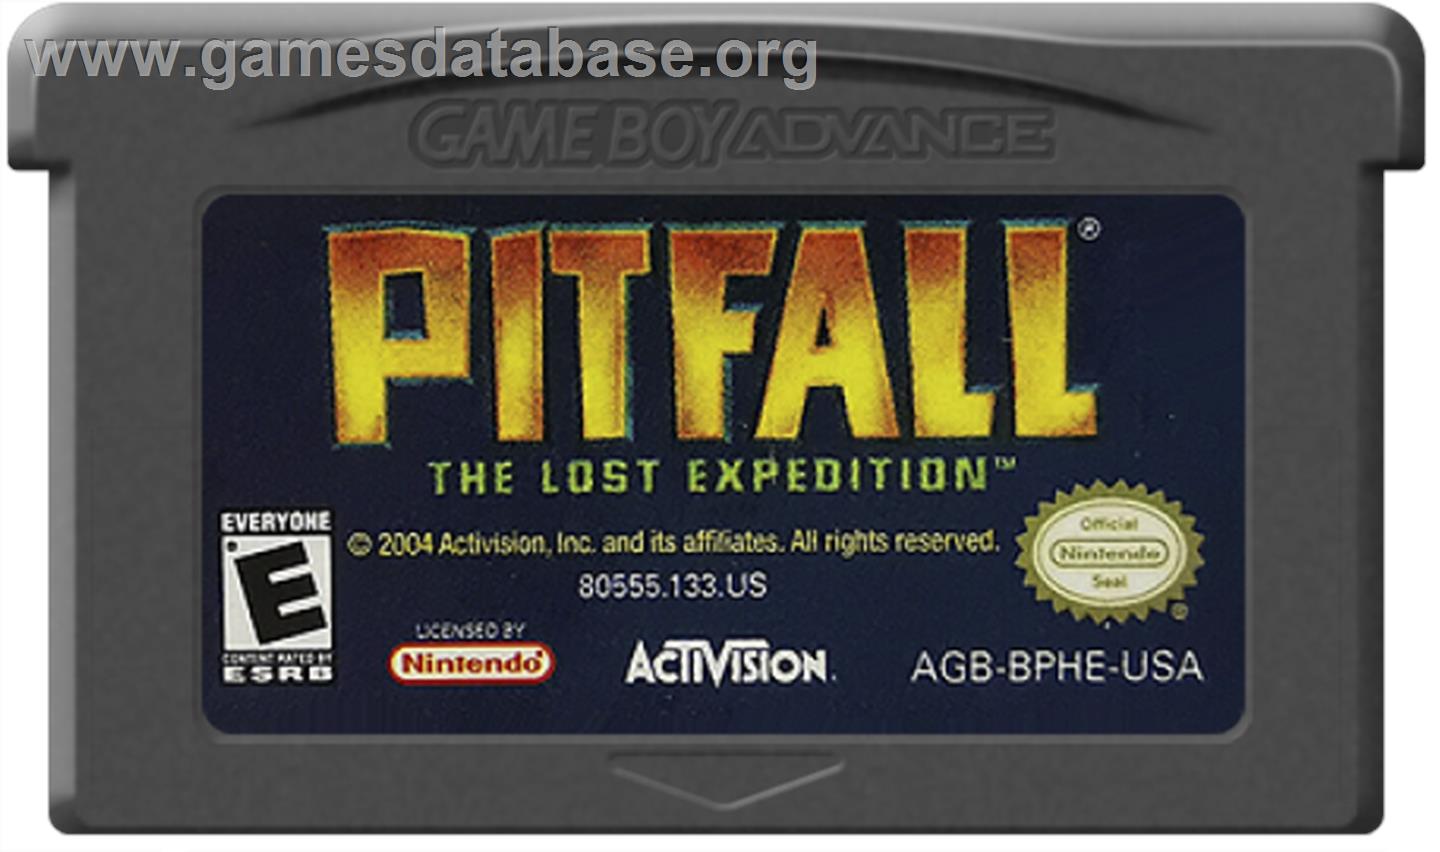 Pitfall: The Lost Expedition - Nintendo Game Boy Advance - Artwork - Cartridge